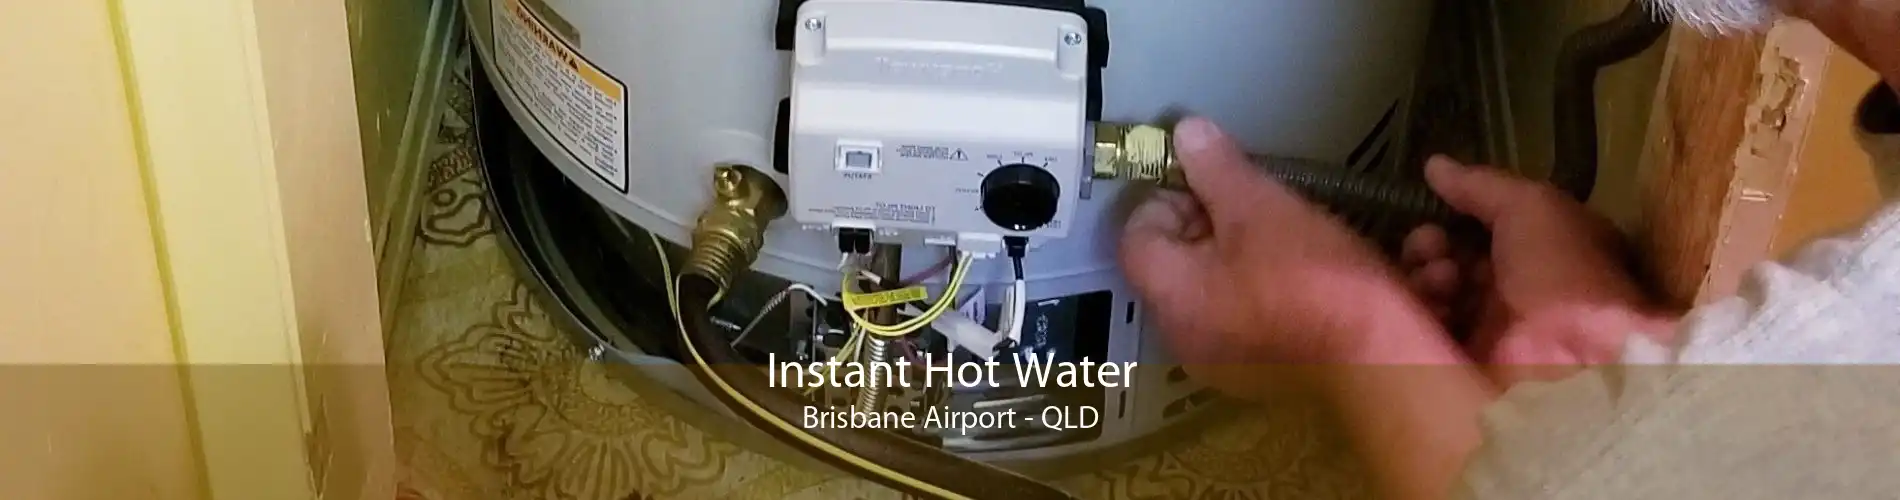 Instant Hot Water Brisbane Airport - QLD